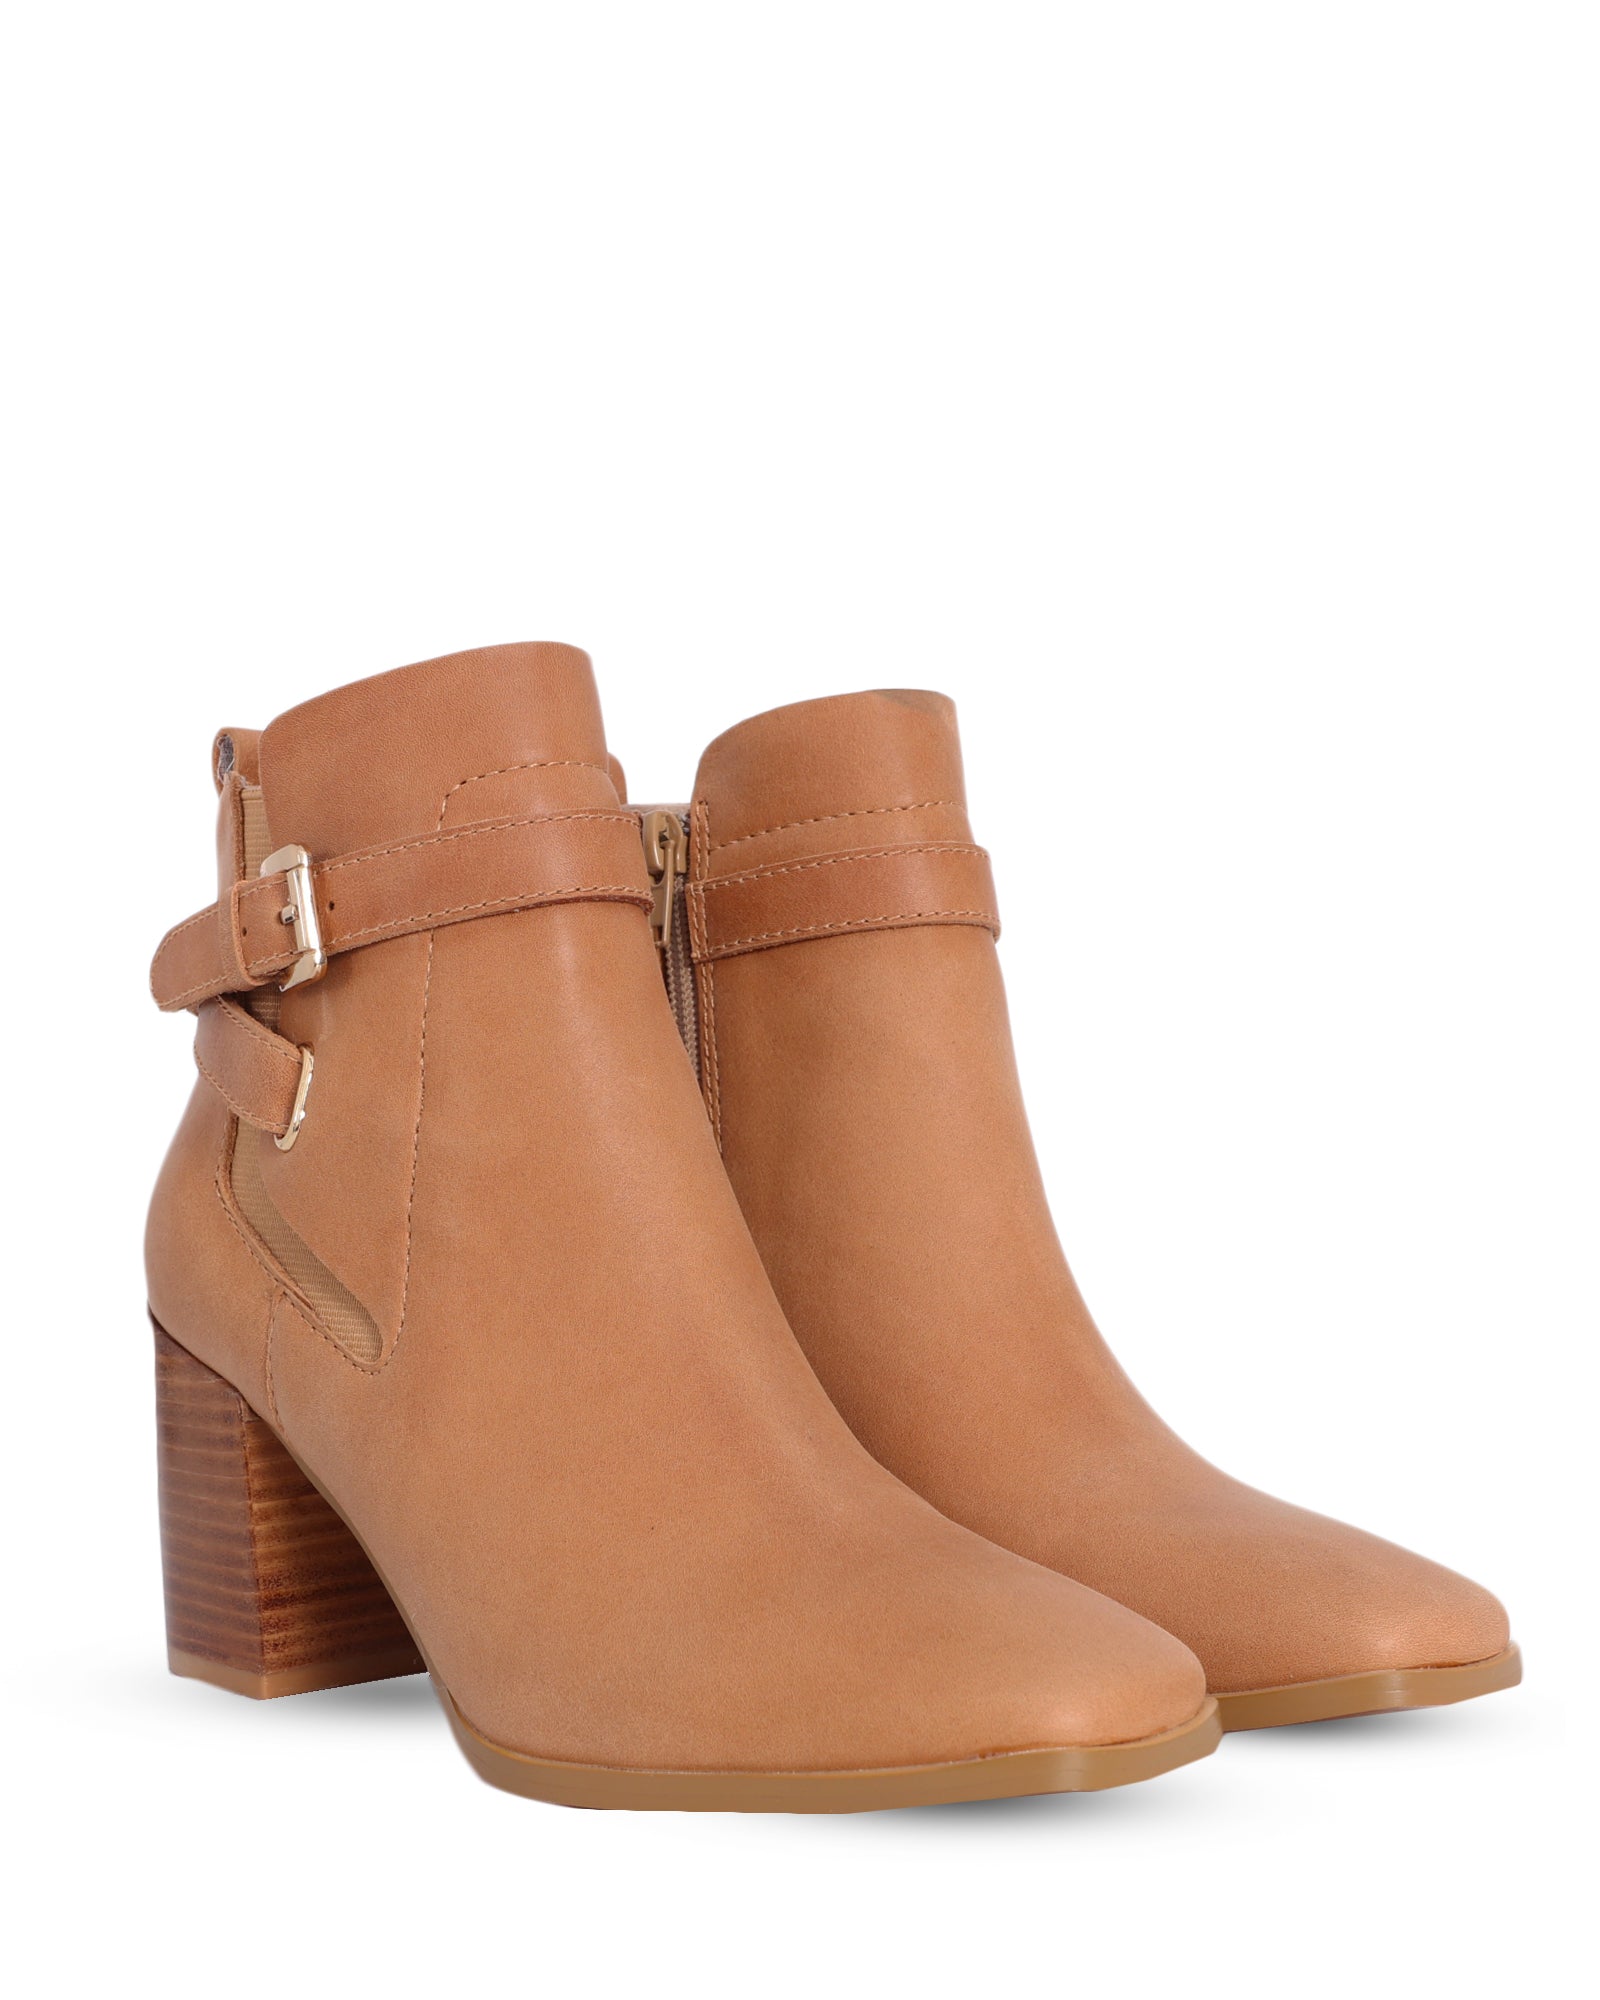 Adelaide Tan 7.5cm Ankle Boot